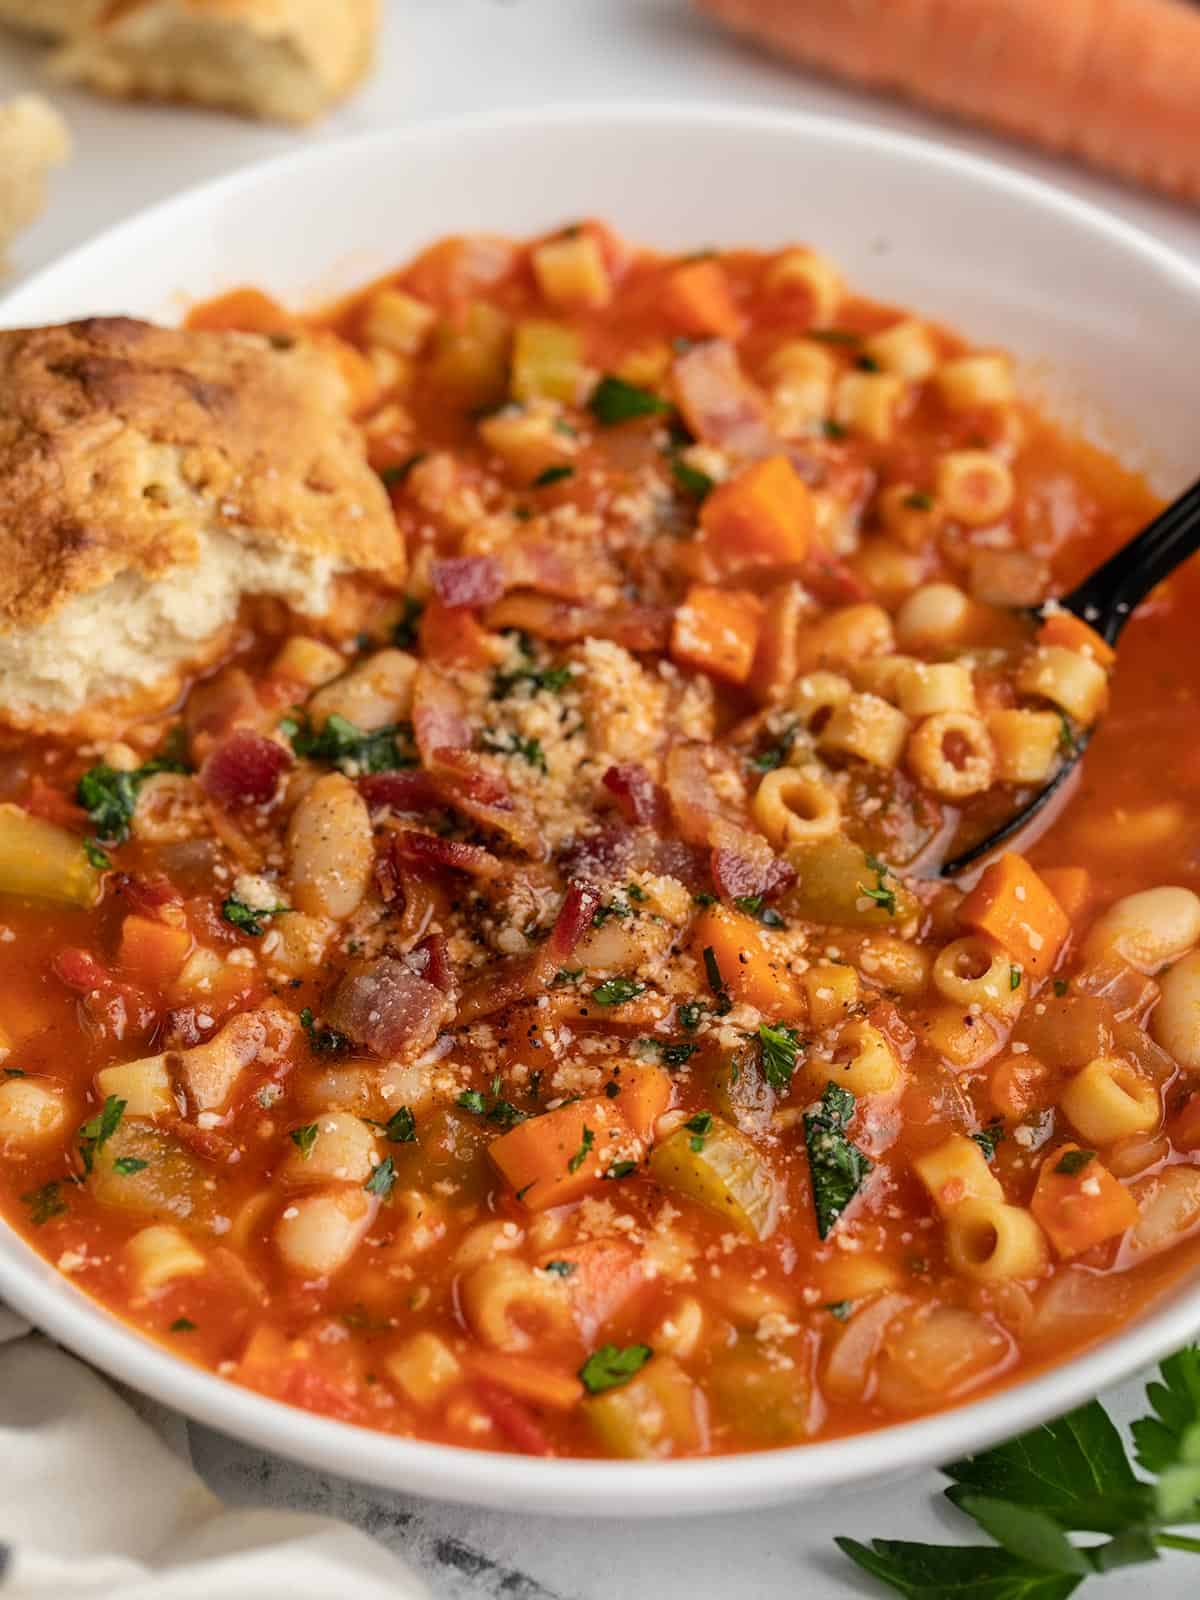 Side view of a bowl of pasta e fagioli soup topped with bacon, parsley and parmesan cheese with a black soup spoon and a torn piece of bread on the side.